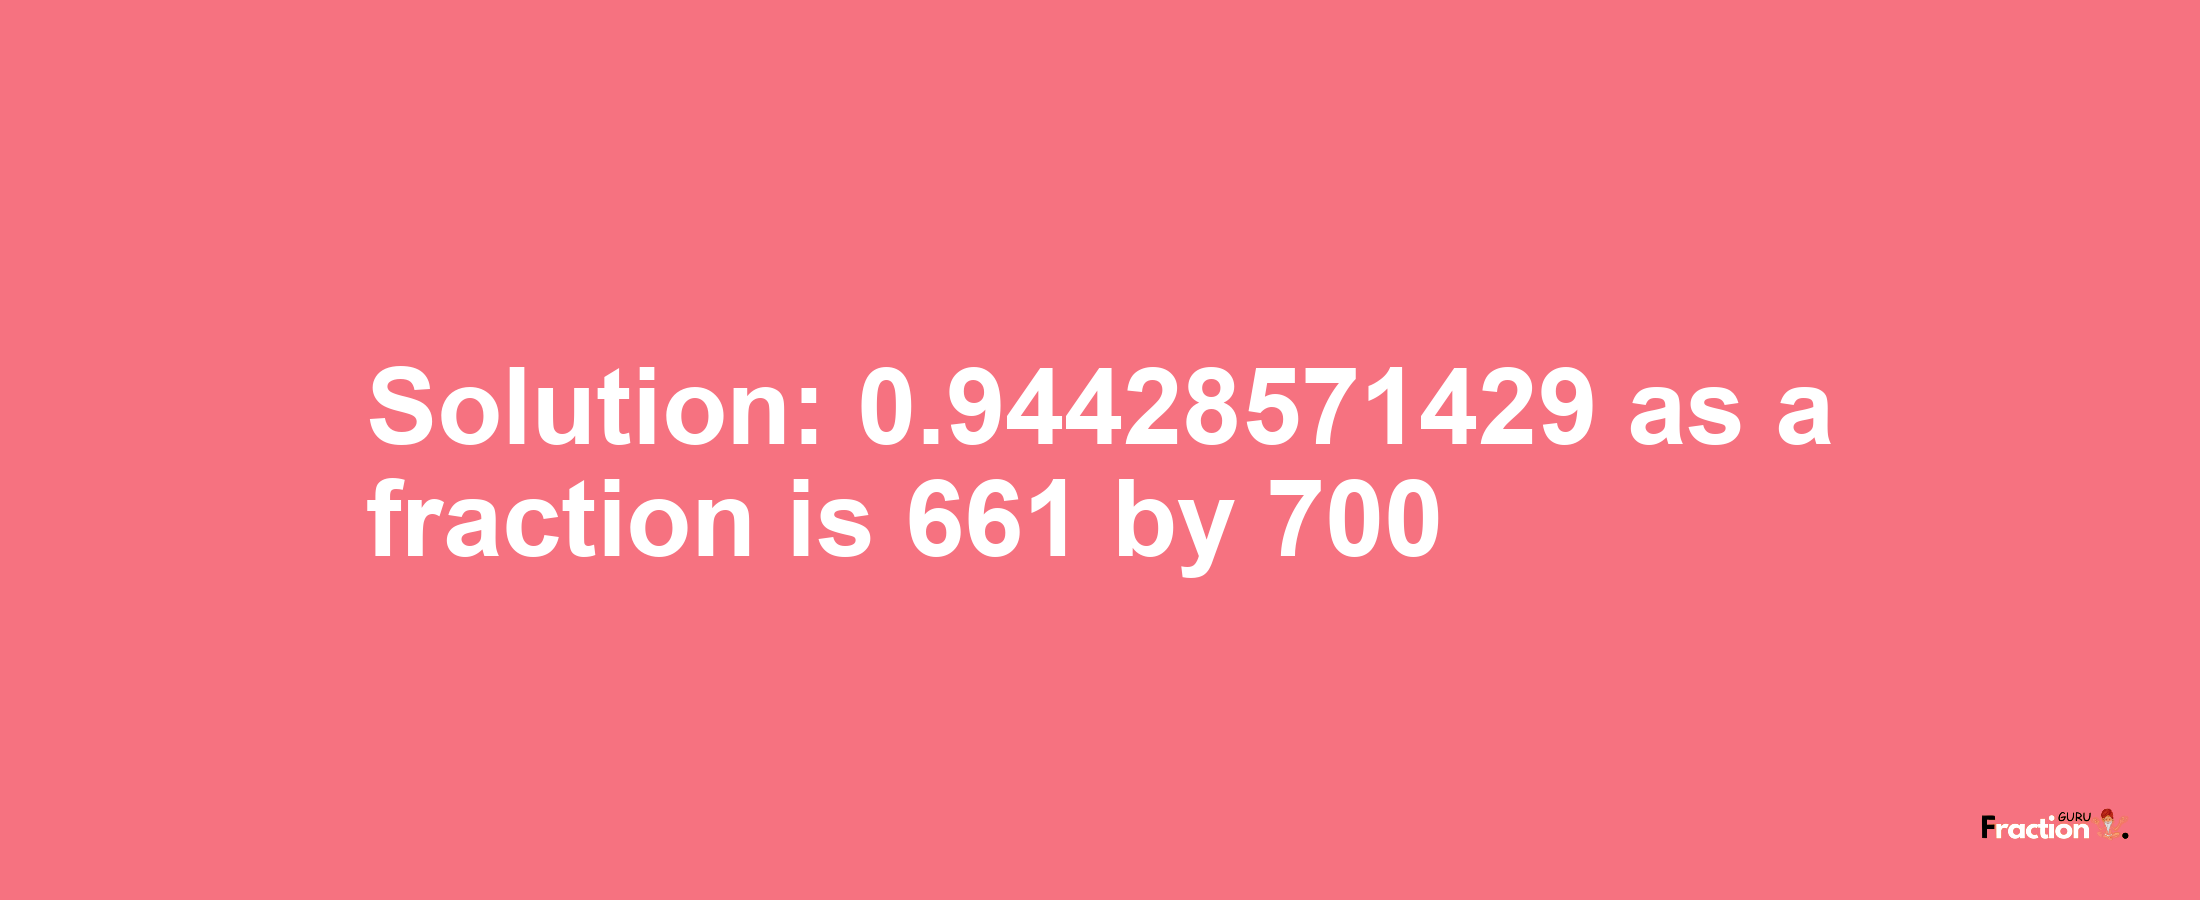 Solution:0.94428571429 as a fraction is 661/700